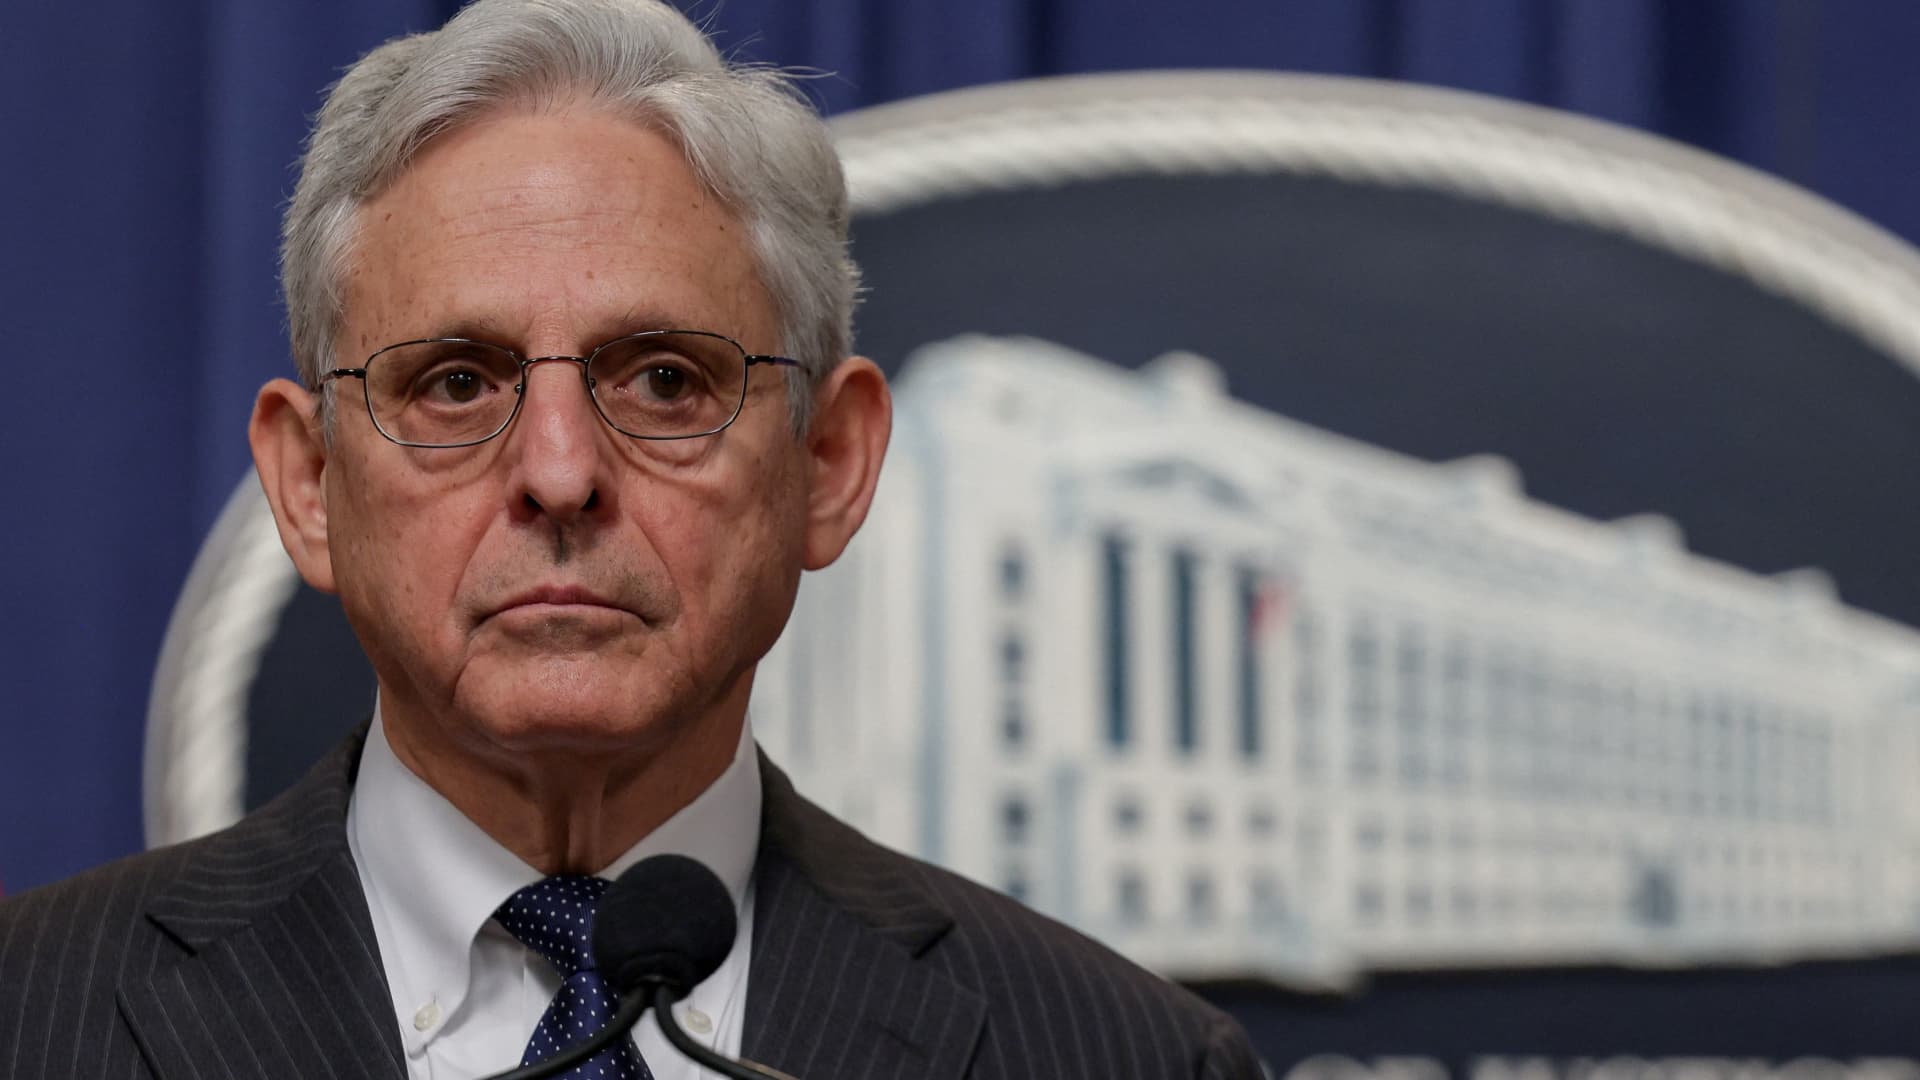 United States Attorney General Merrick Garland speaks during a press conference announcing a significant firearms trafficking enforcement action and ongoing efforts to protect communities from violent crime and gun violence at the Department of Justice in Washington, June 13, 2022.